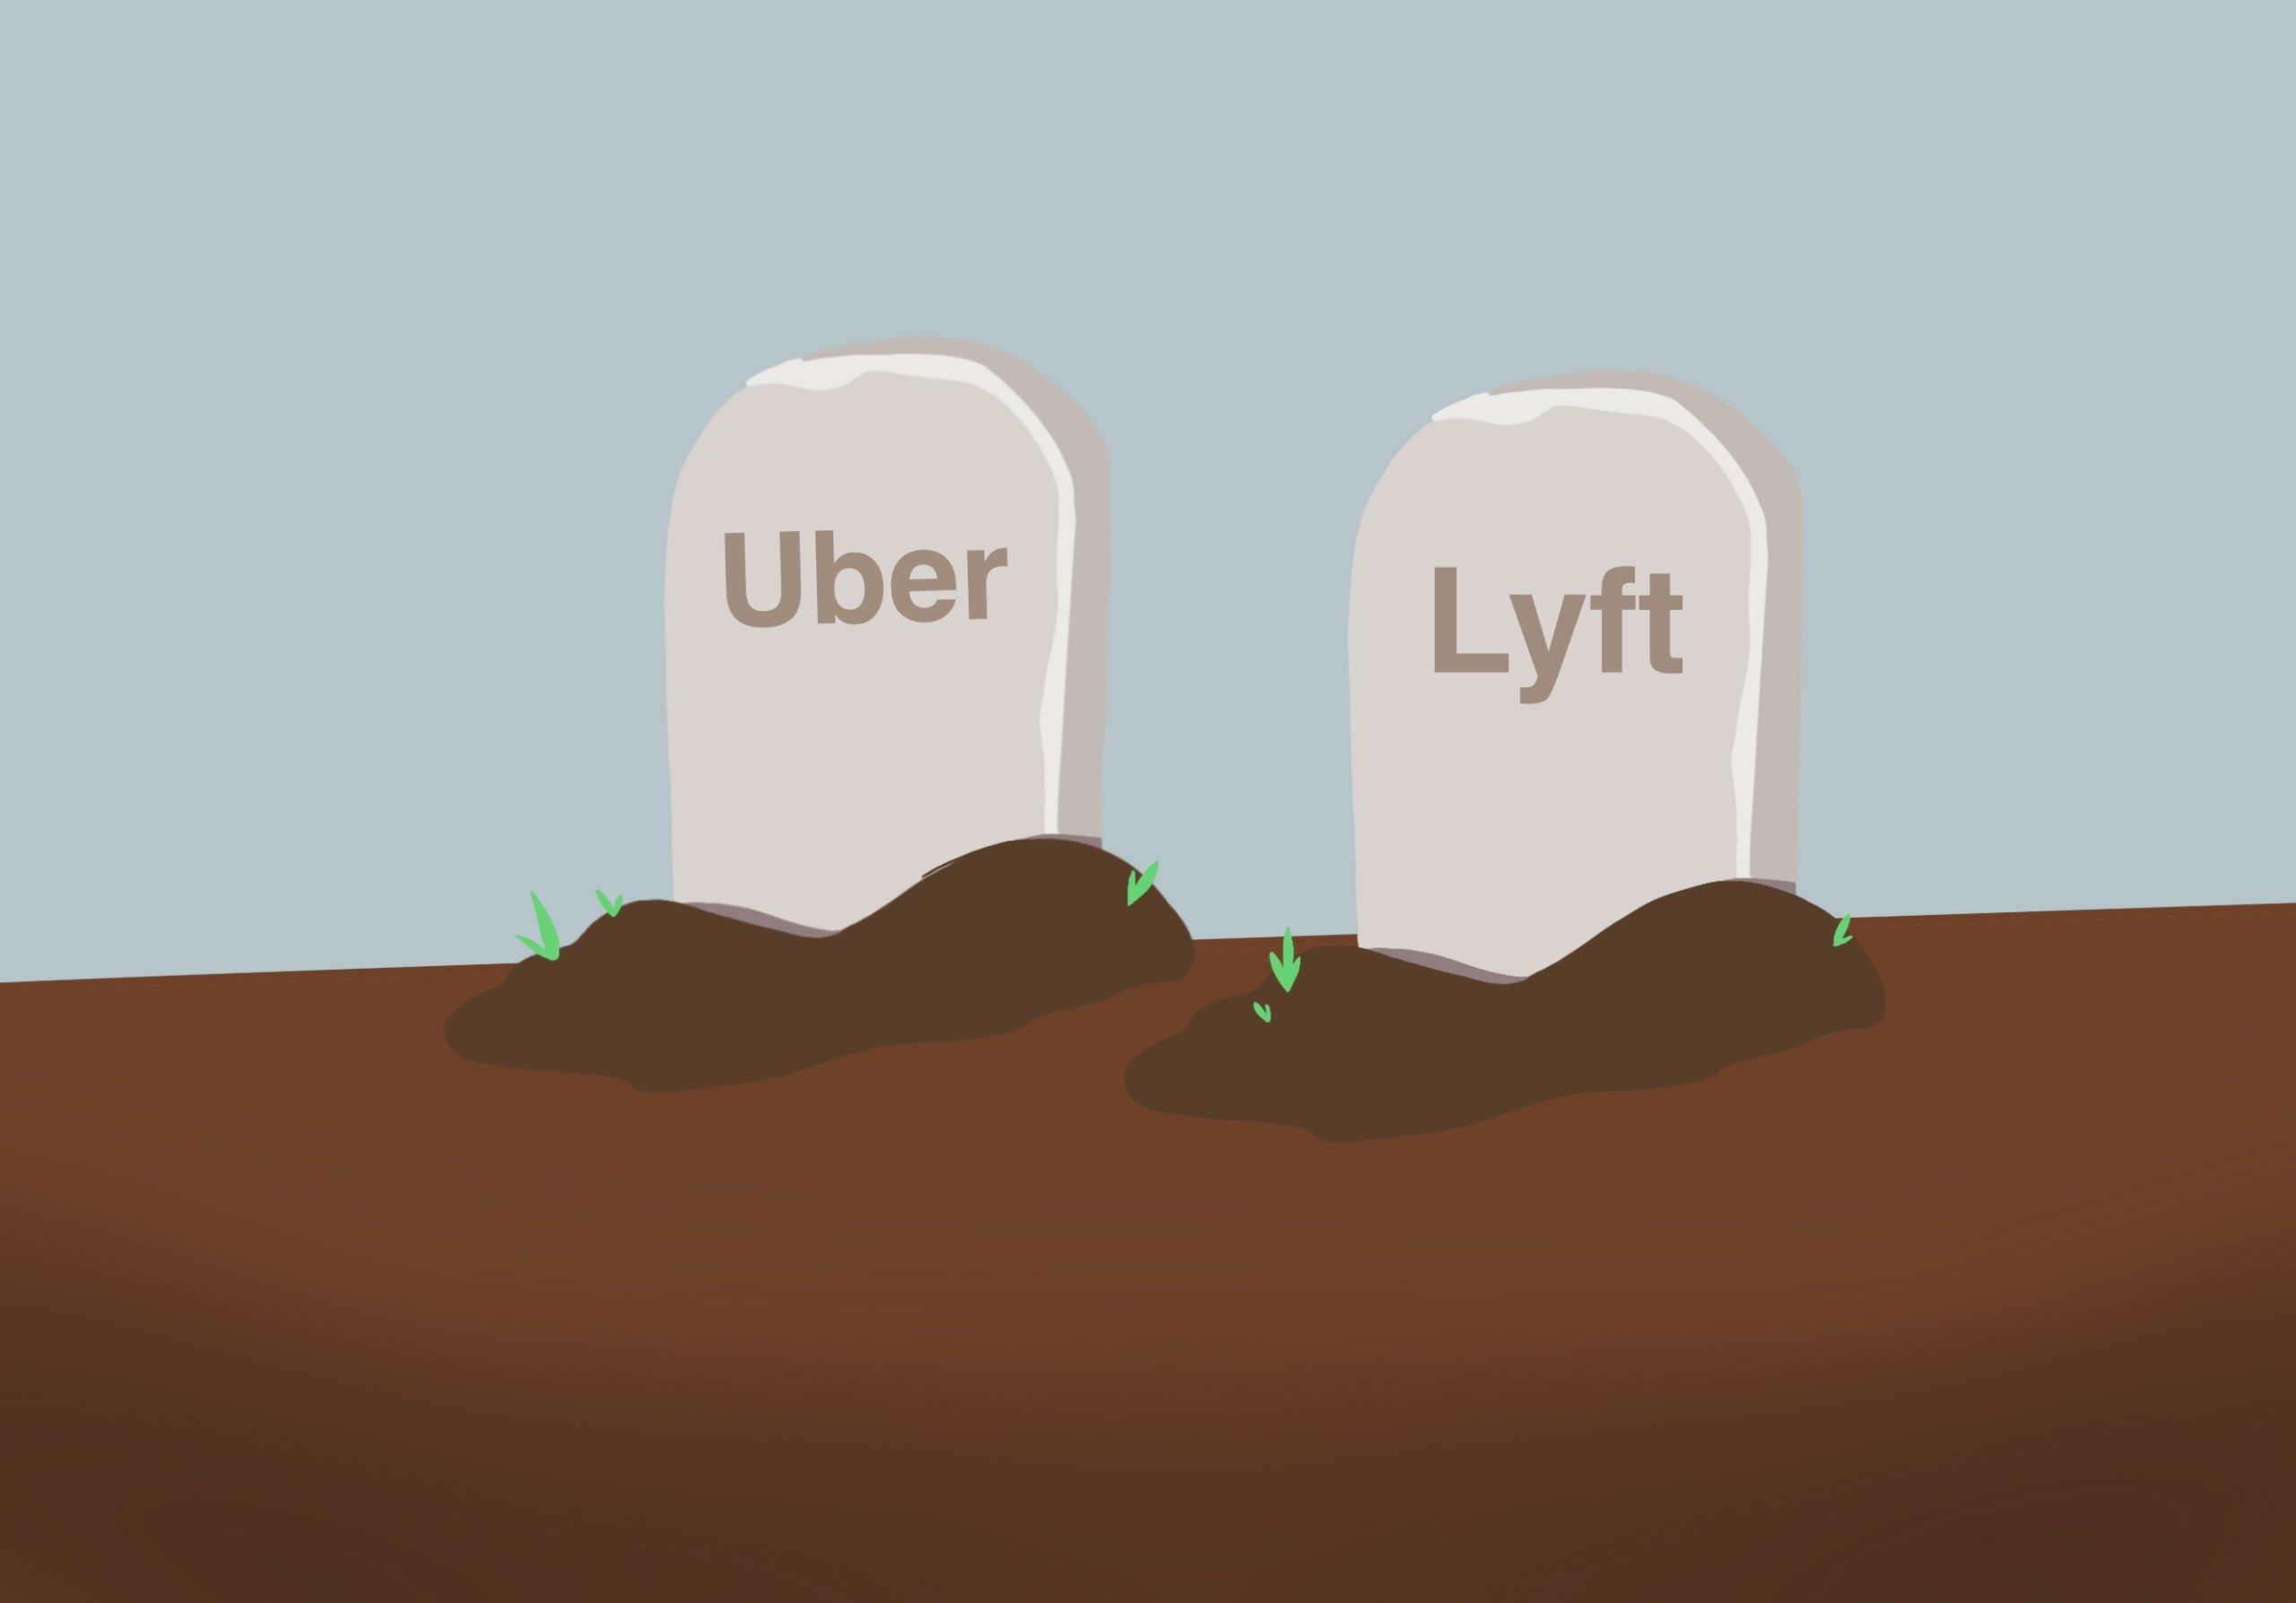 With Uber and Lyft gone, the road ahead is unclear